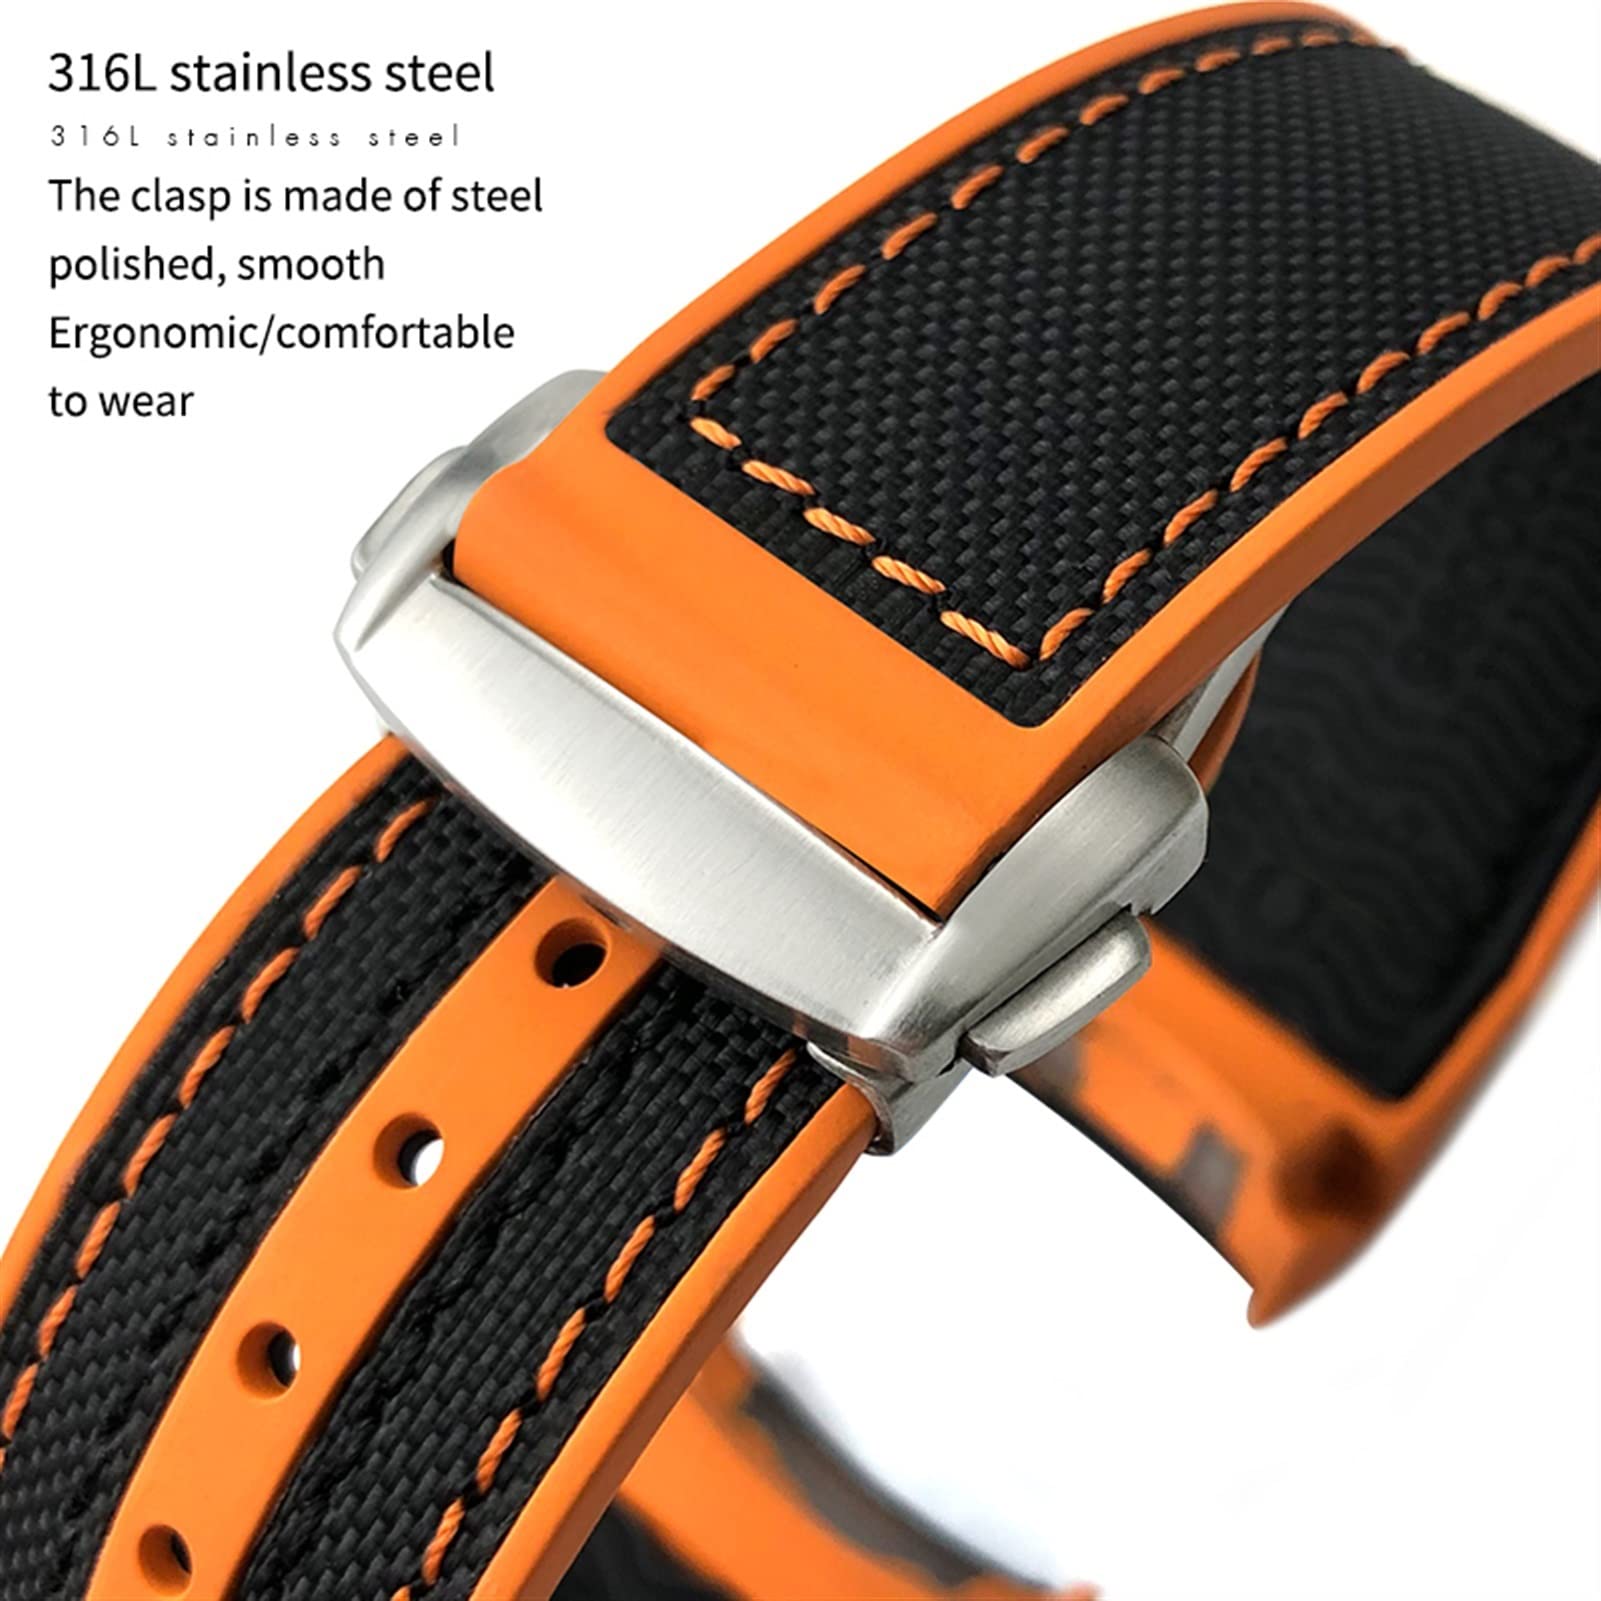 CRFYJ 20mm 21mm 22mm Nylon Rubber Watch Band Fit for Omega GMT Seamaster Planet Ocean 600 8900 Orange Canvas Silicone Strap (Color : Black Orange, Size : 21mm)